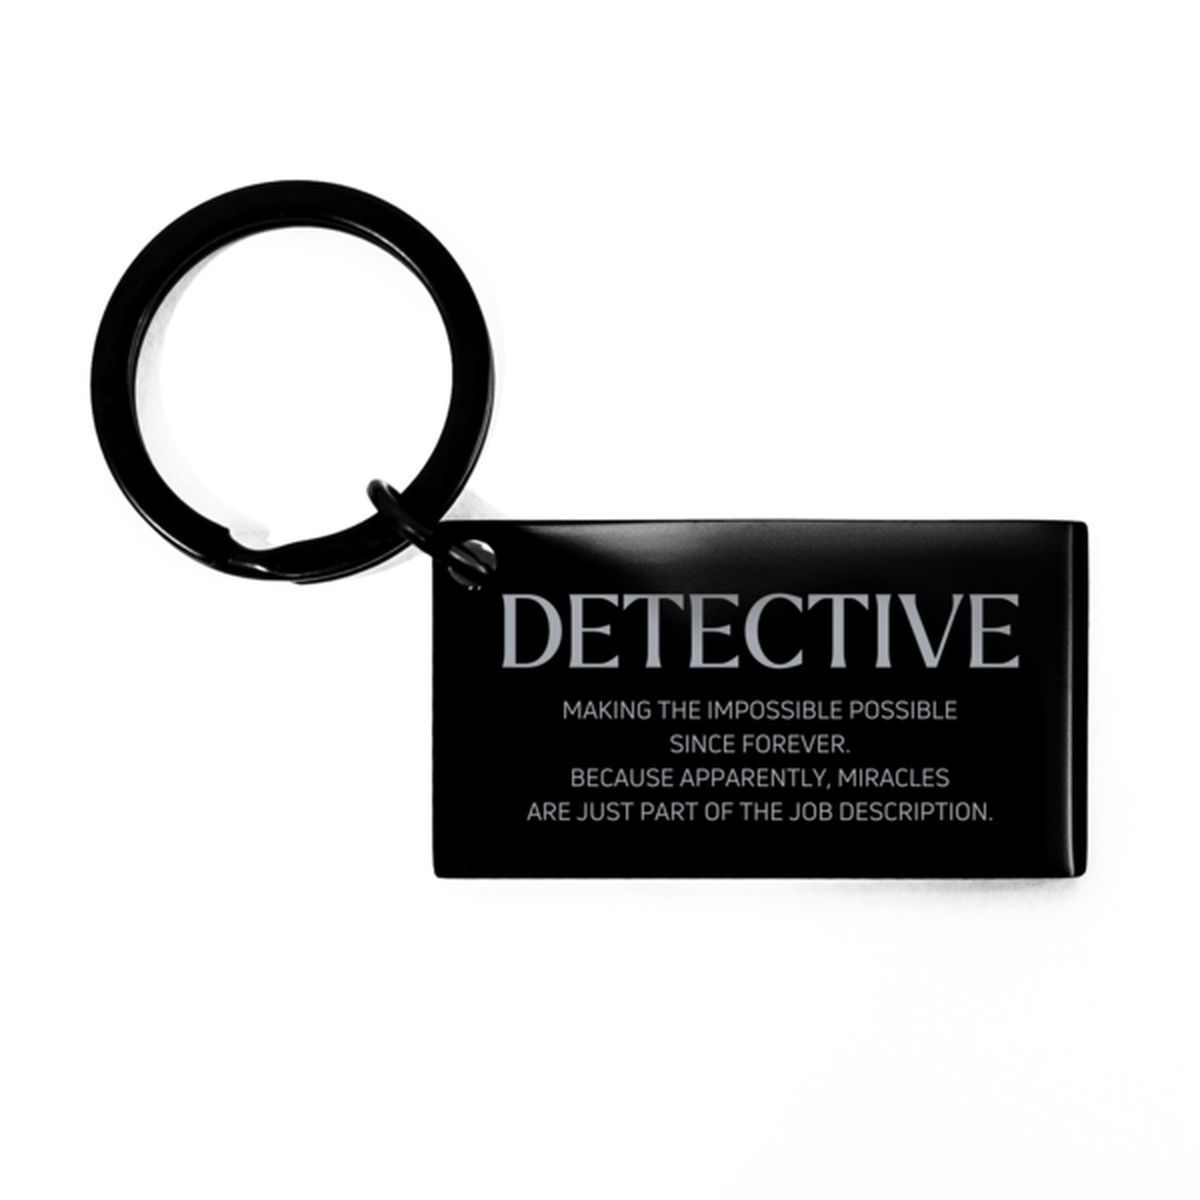 Funny Detective Gifts, Miracles are just part of the job description, Inspirational Birthday Keychain For Detective, Men, Women, Coworkers, Friends, Boss